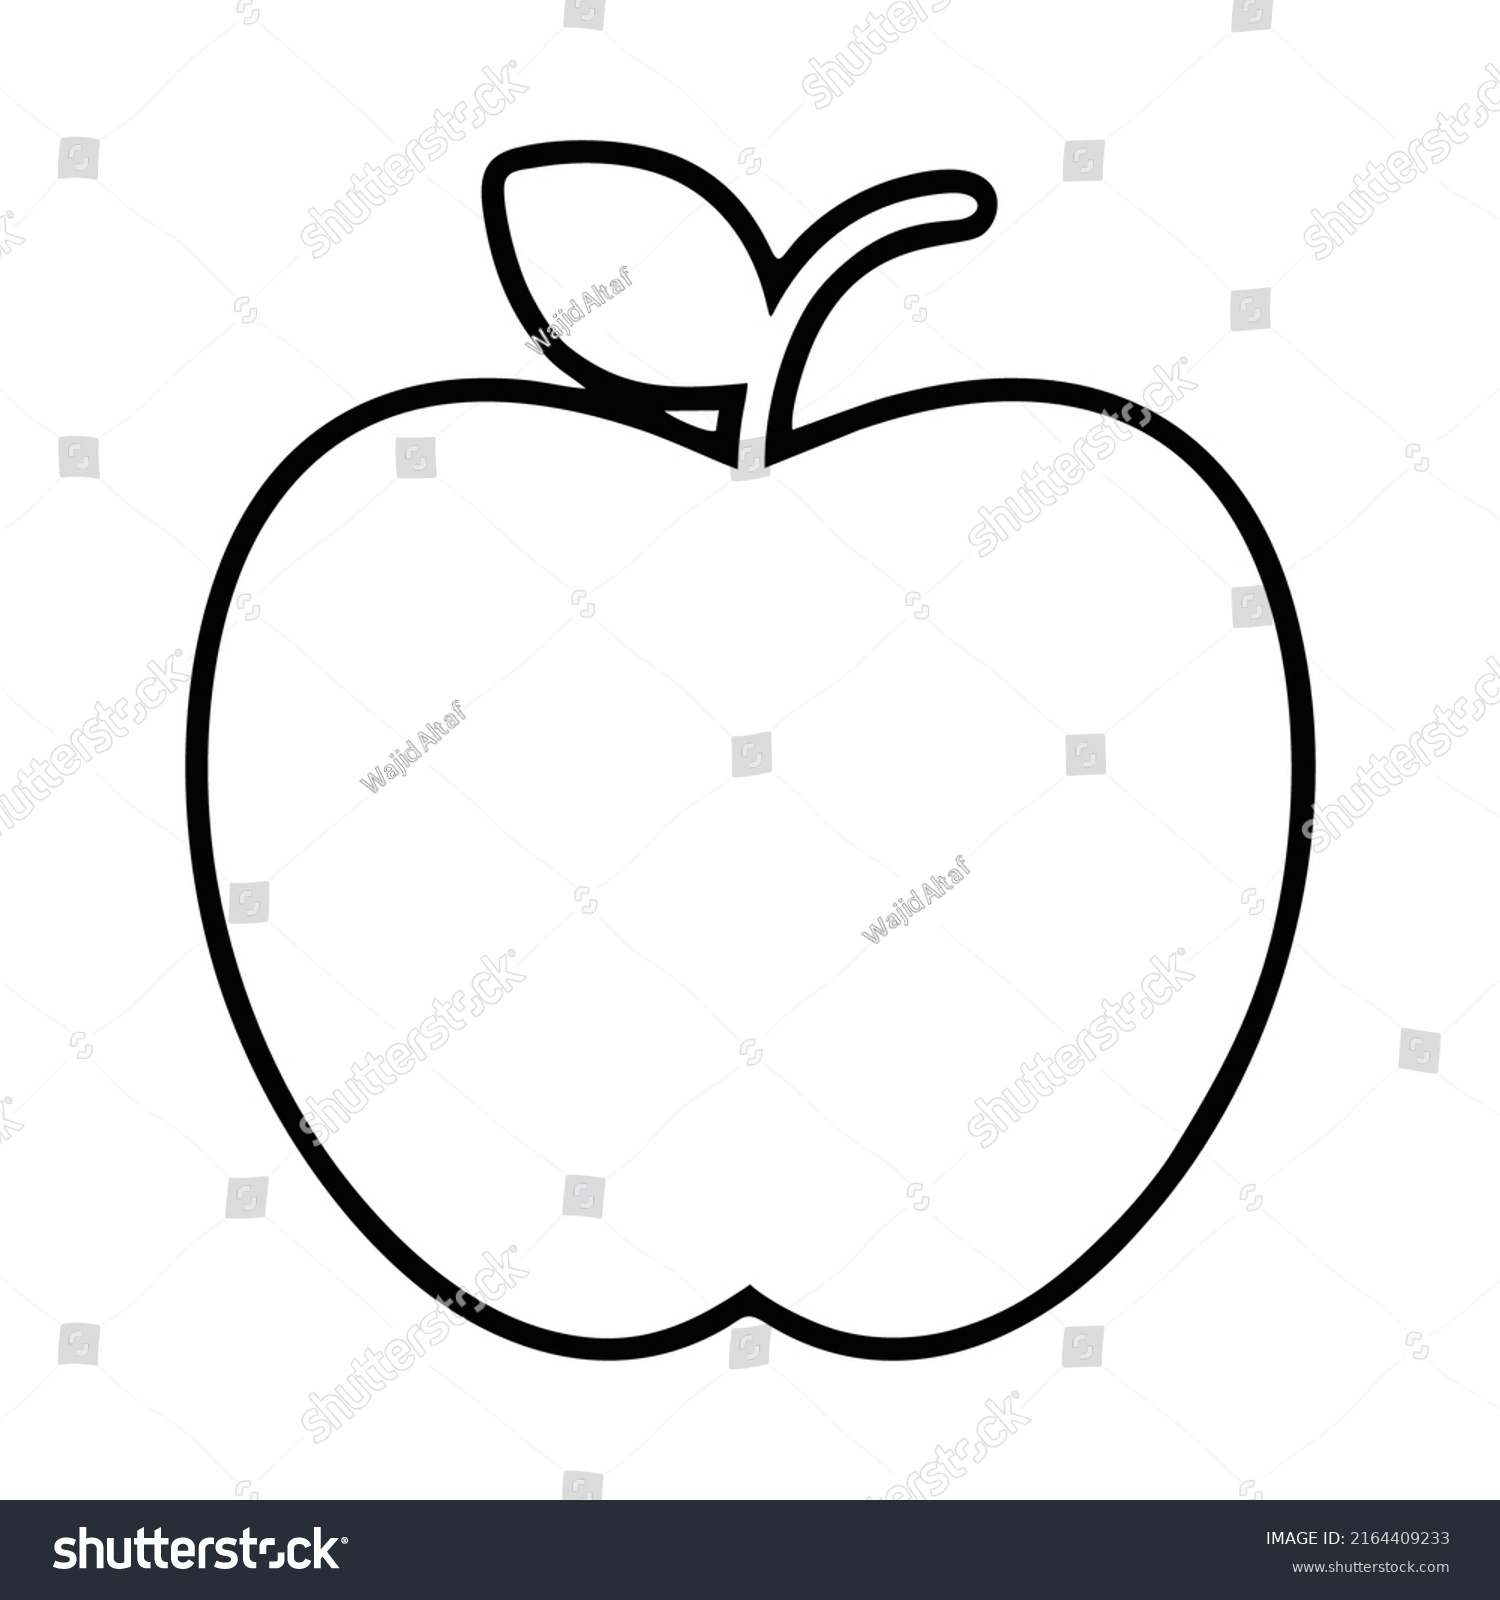 printable-apple-coloring-page-children-stock-vector-royalty-free